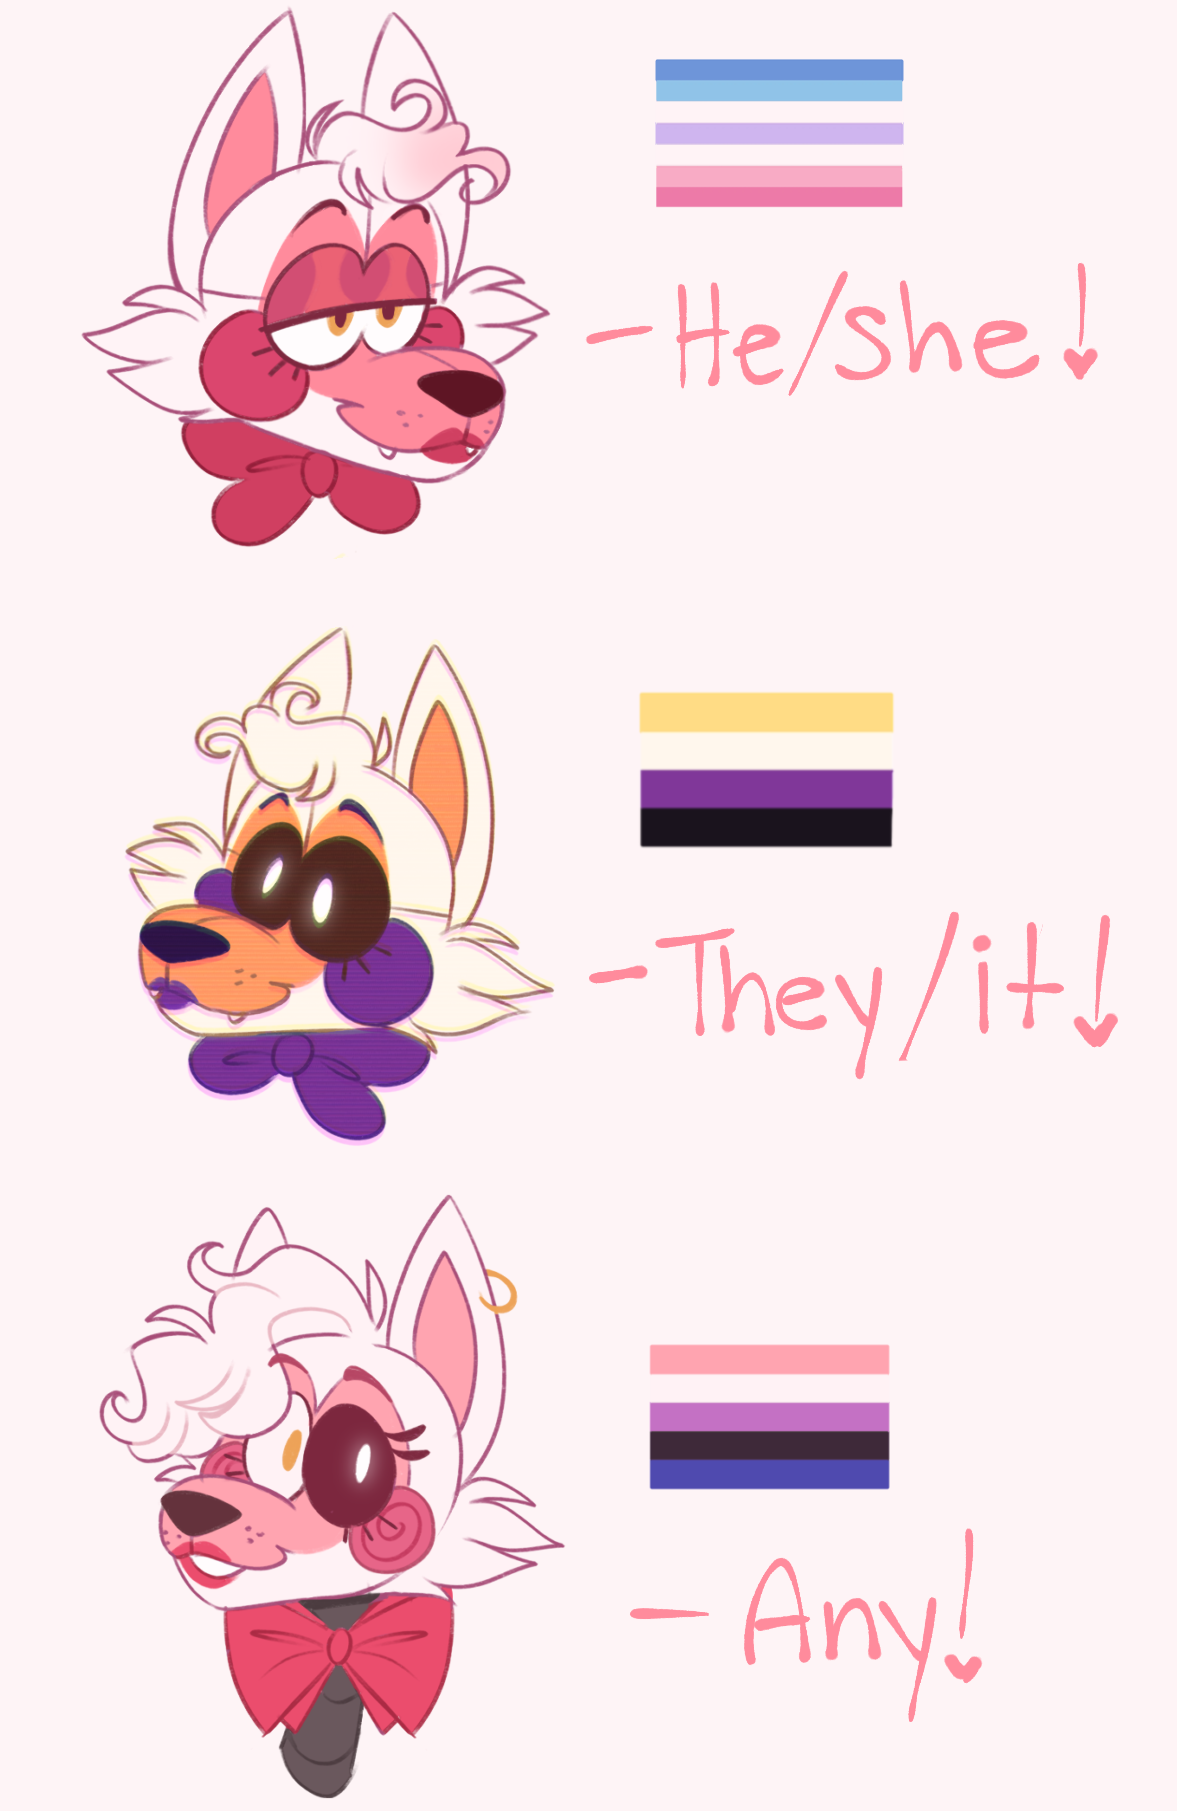 possibly figured out the gender of lolbit and funtime foxy :  r/fivenightsatfreddys